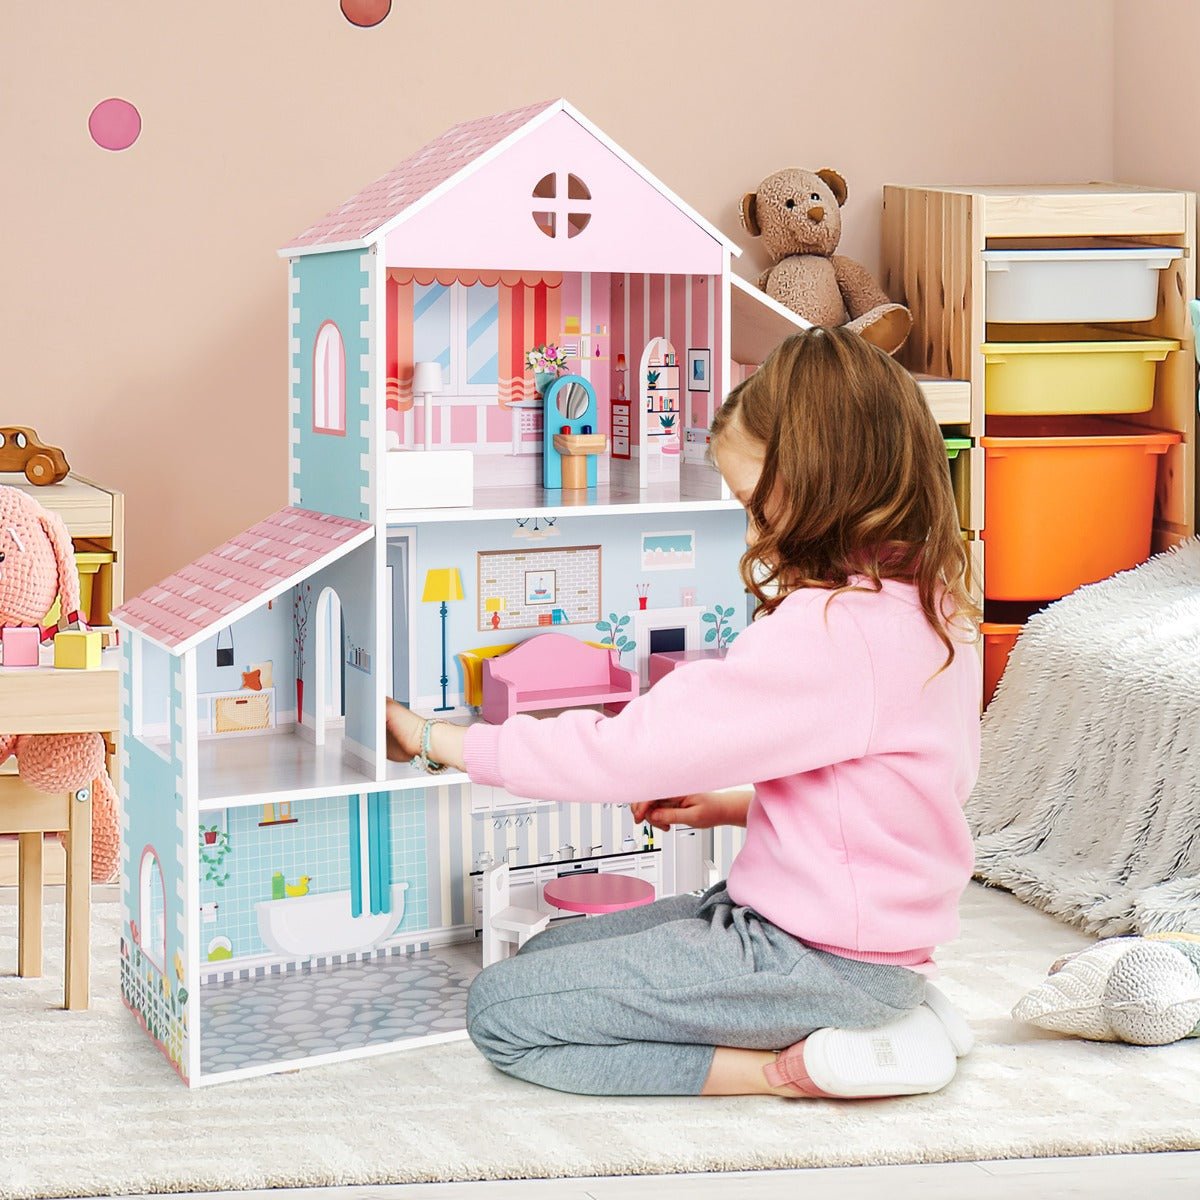 Furnished Wooden Doll House: Where Imagination Takes Center Stage